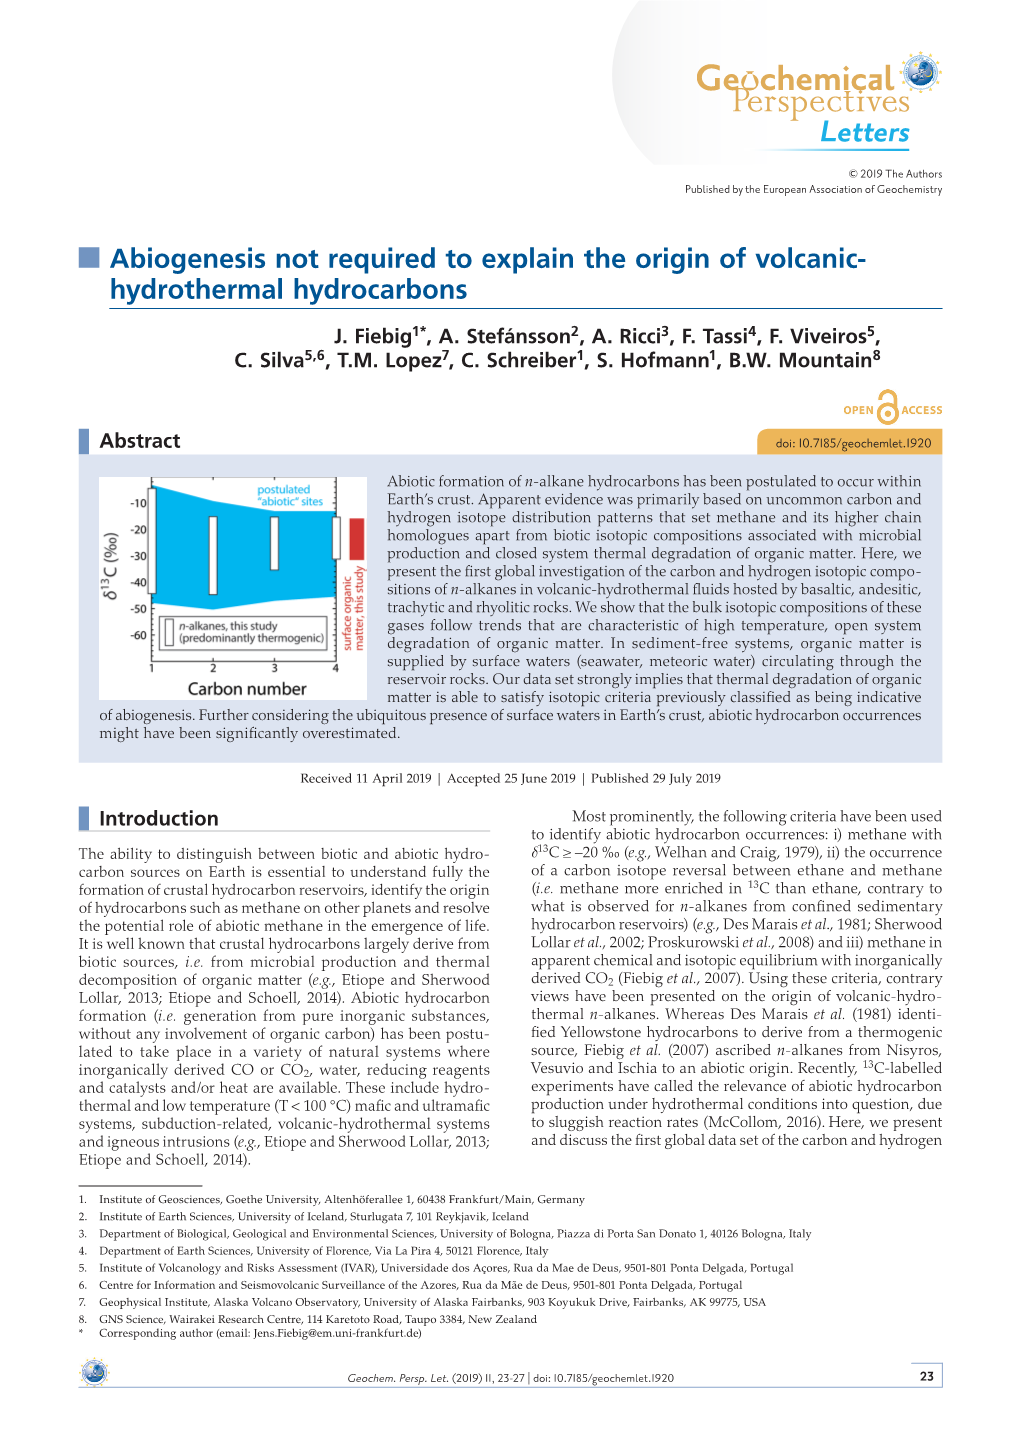 Abiogenesis Not Required to Explain the Origin of Volcanic- Hydrothermal Hydrocarbons